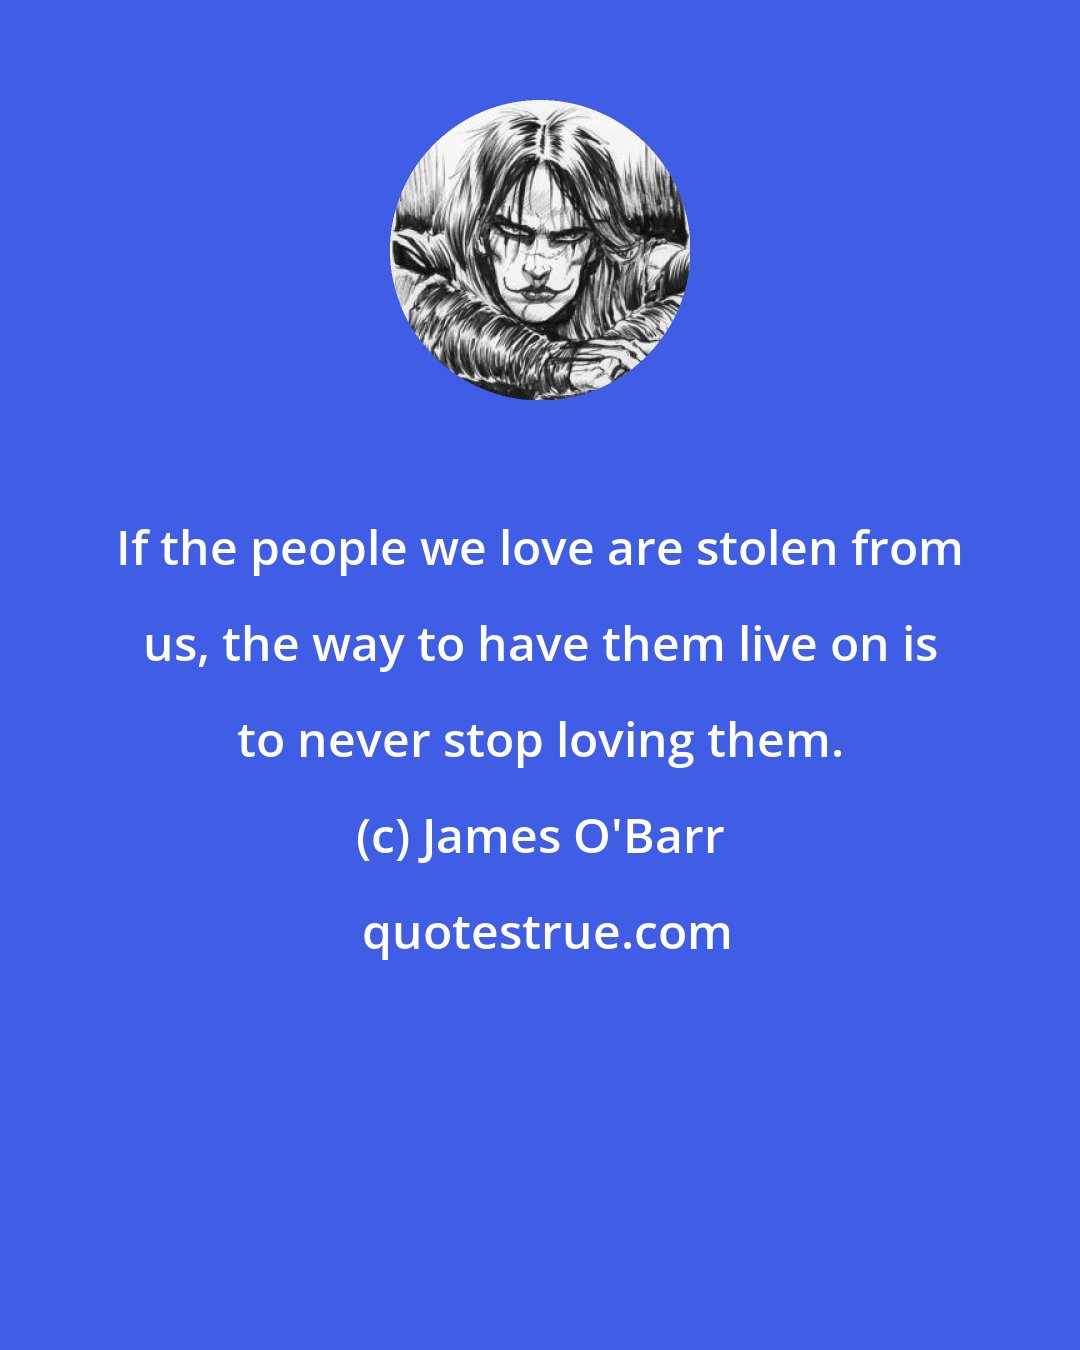 James O'Barr: If the people we love are stolen from us, the way to have them live on is to never stop loving them.